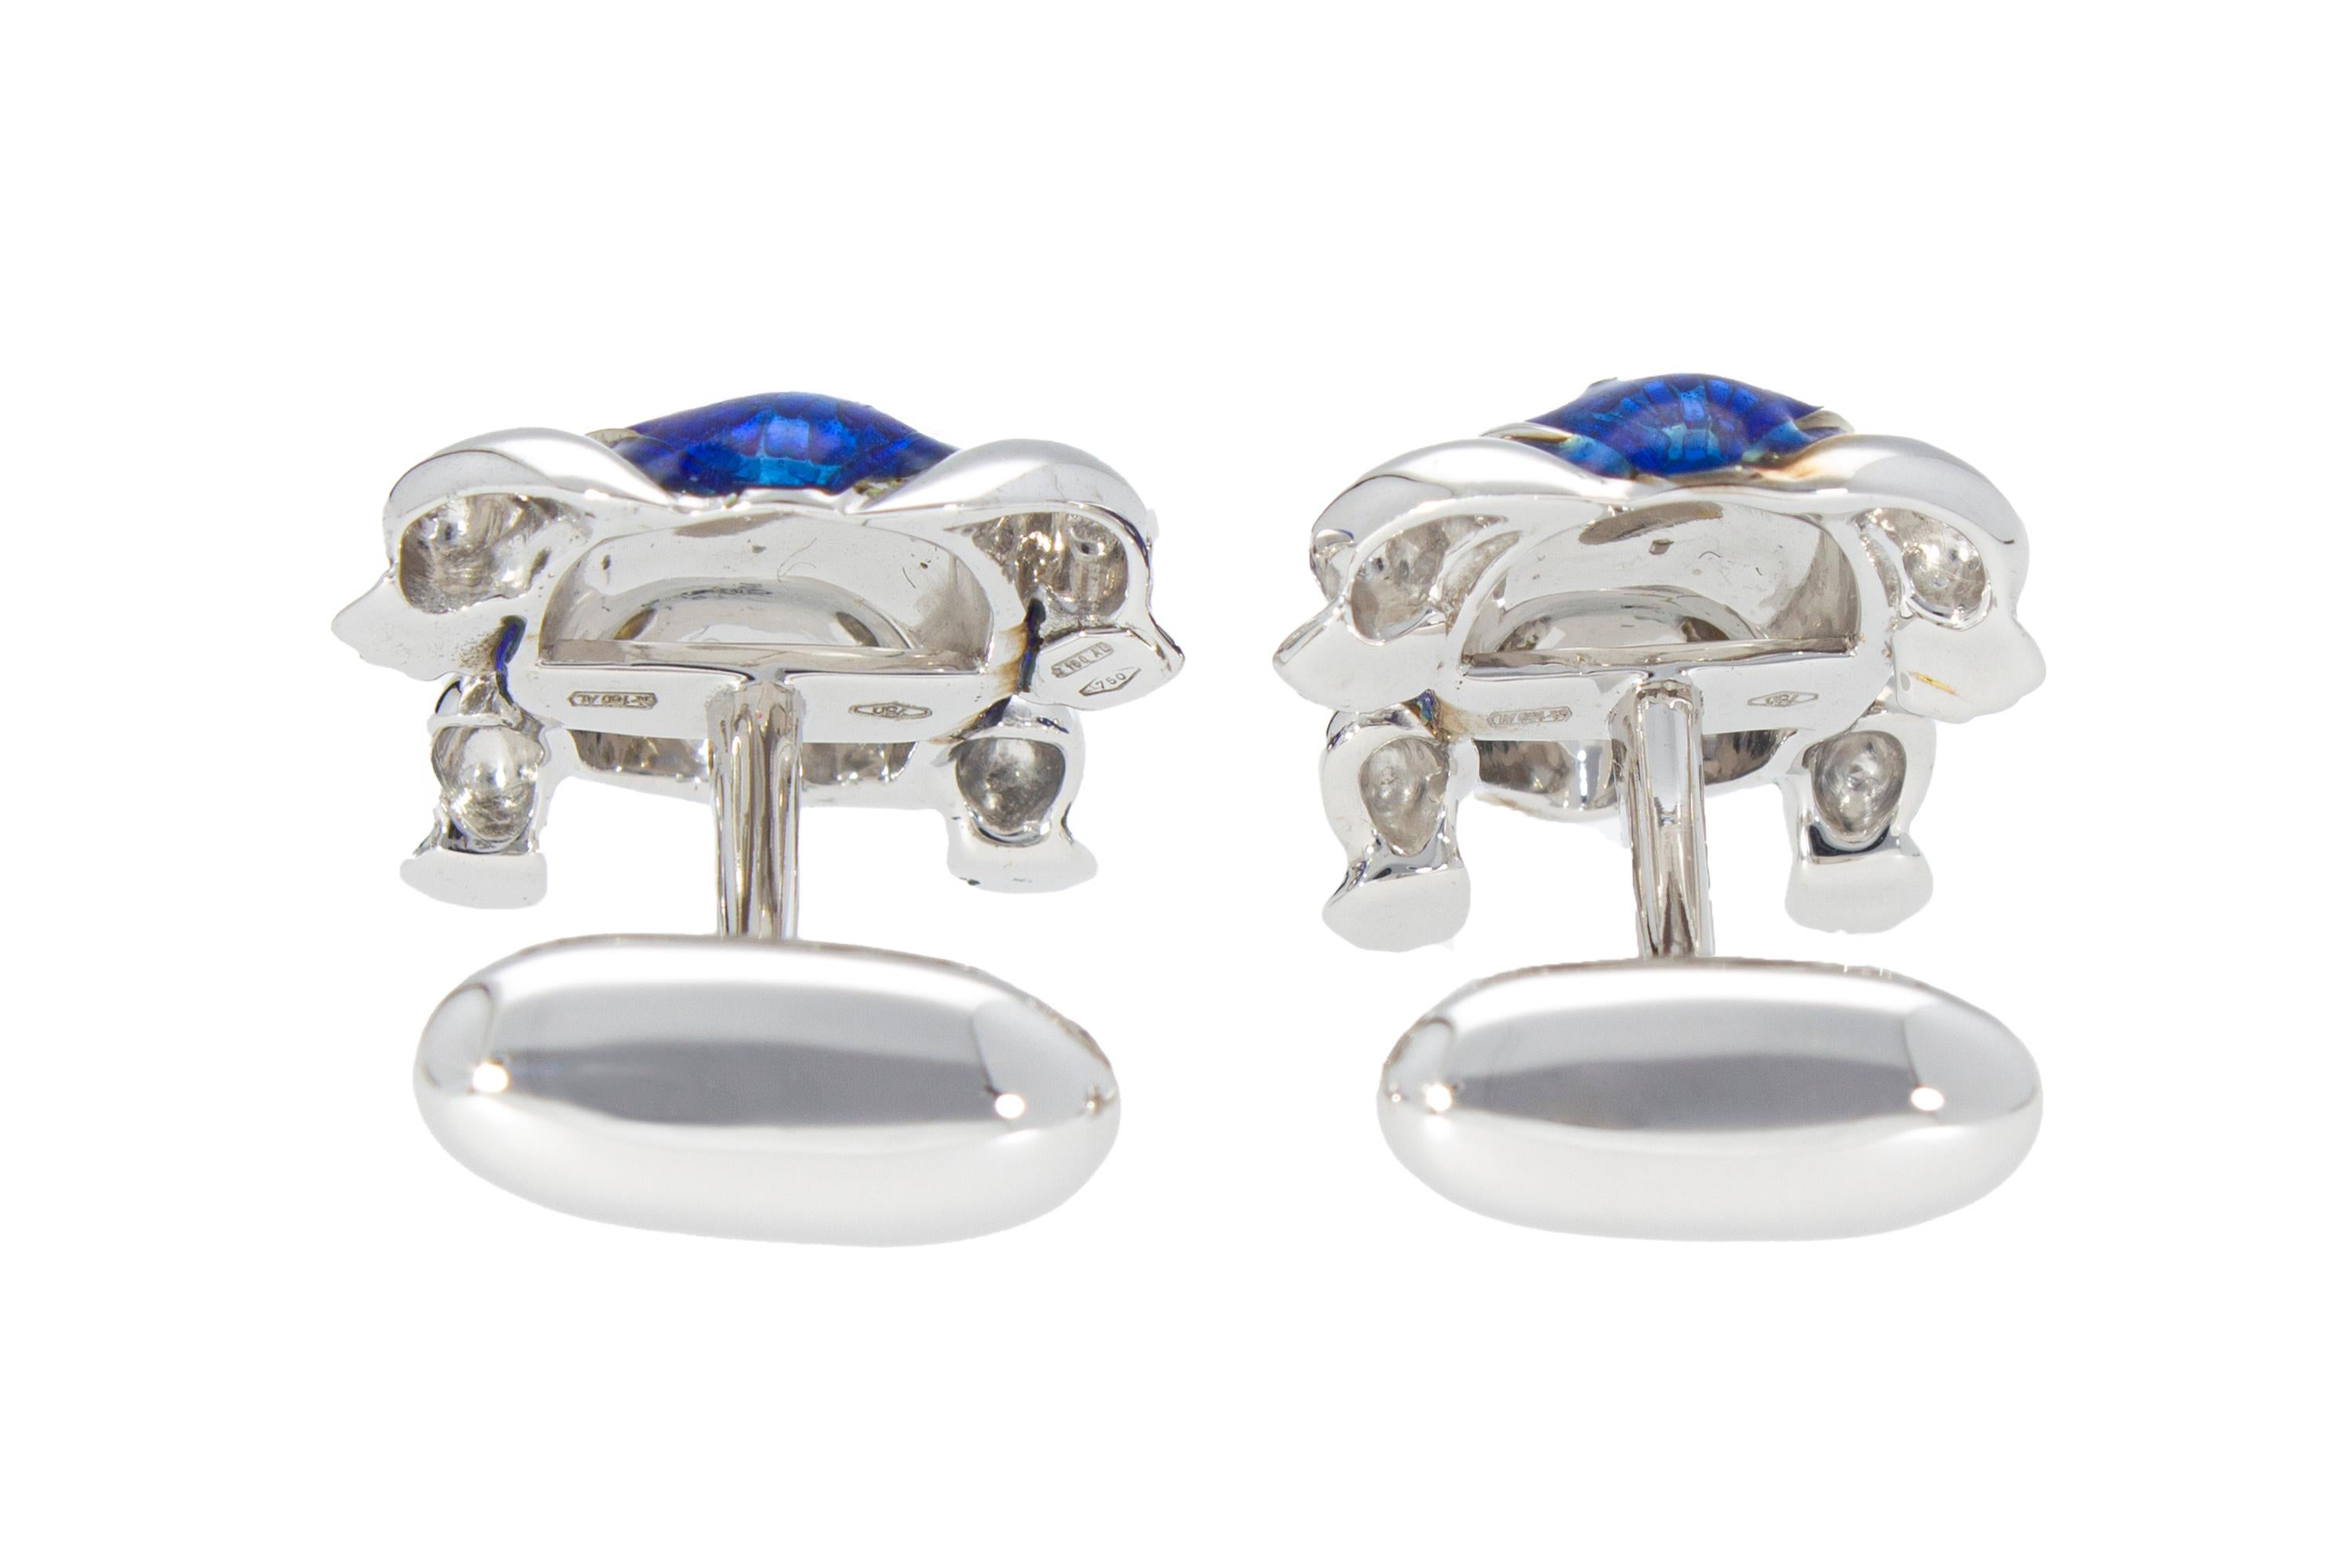 18 Kt White Gold with Blu Enamel Diamonds Frog Cufflinks Handcraft Made in Italy For Sale 4